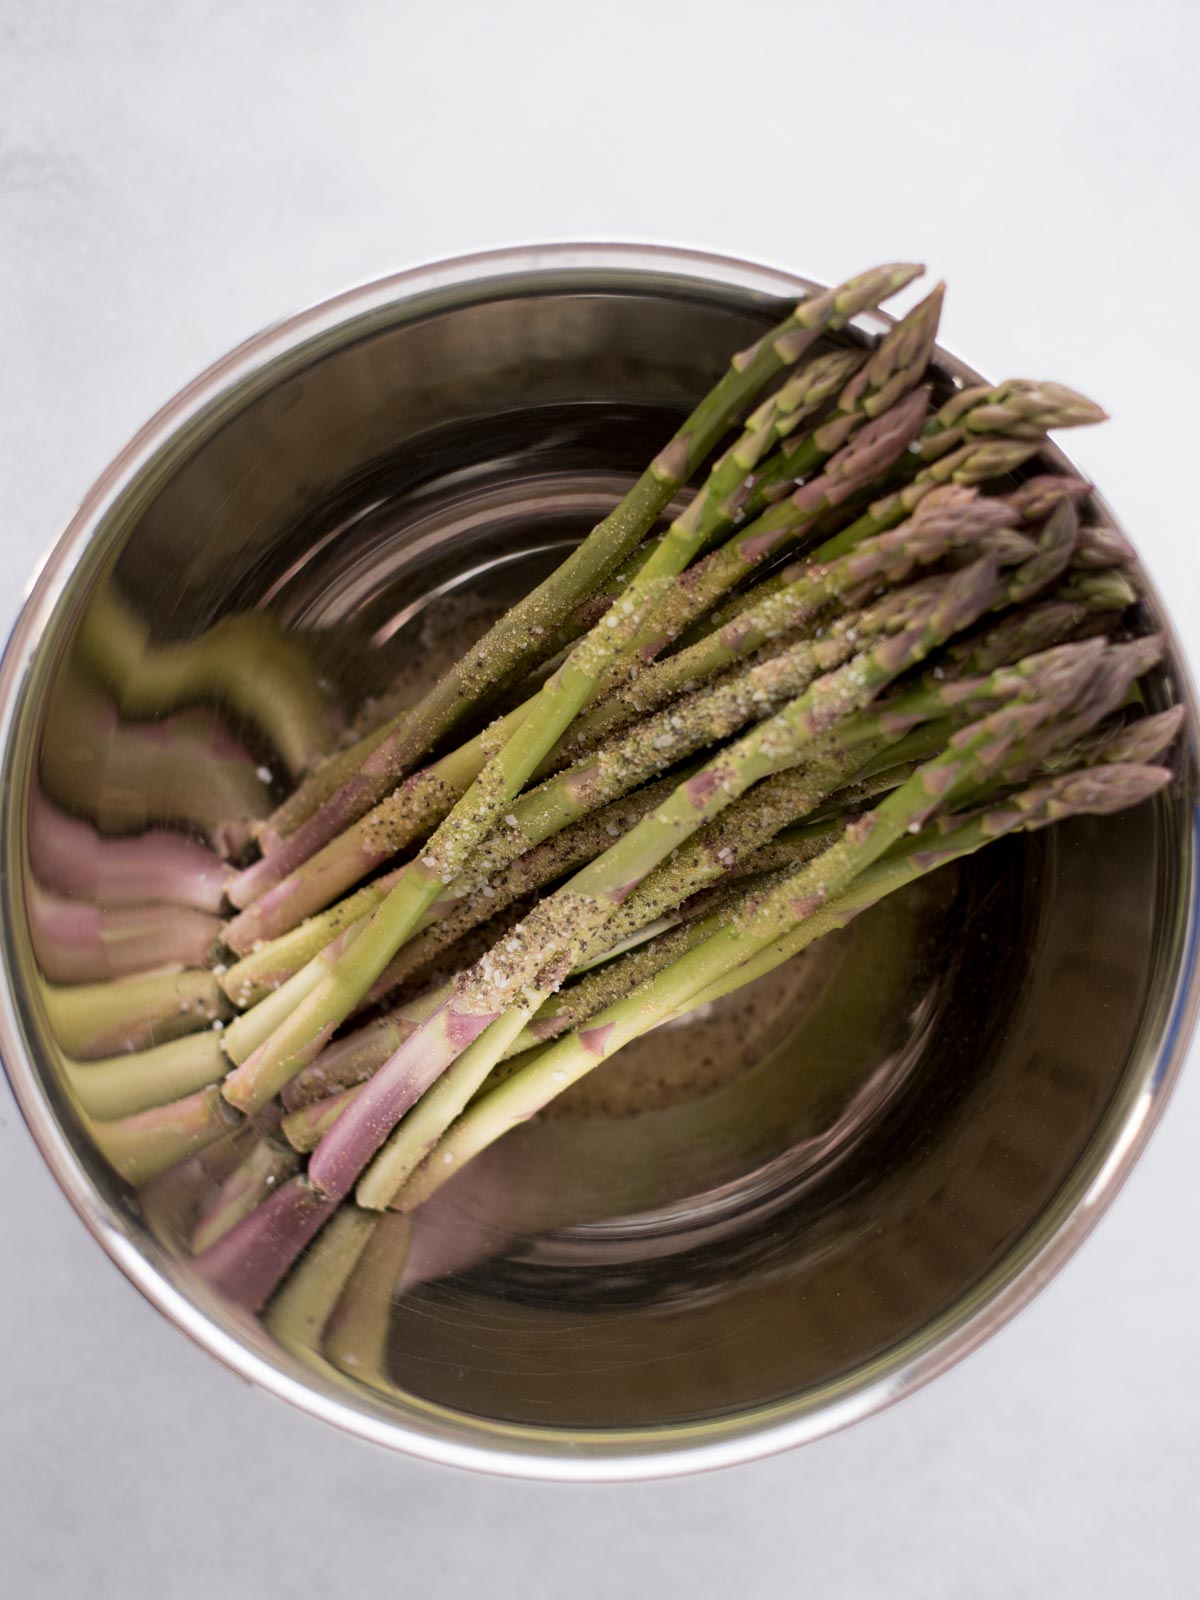 Seasoned asparagus in a mixing bowl.